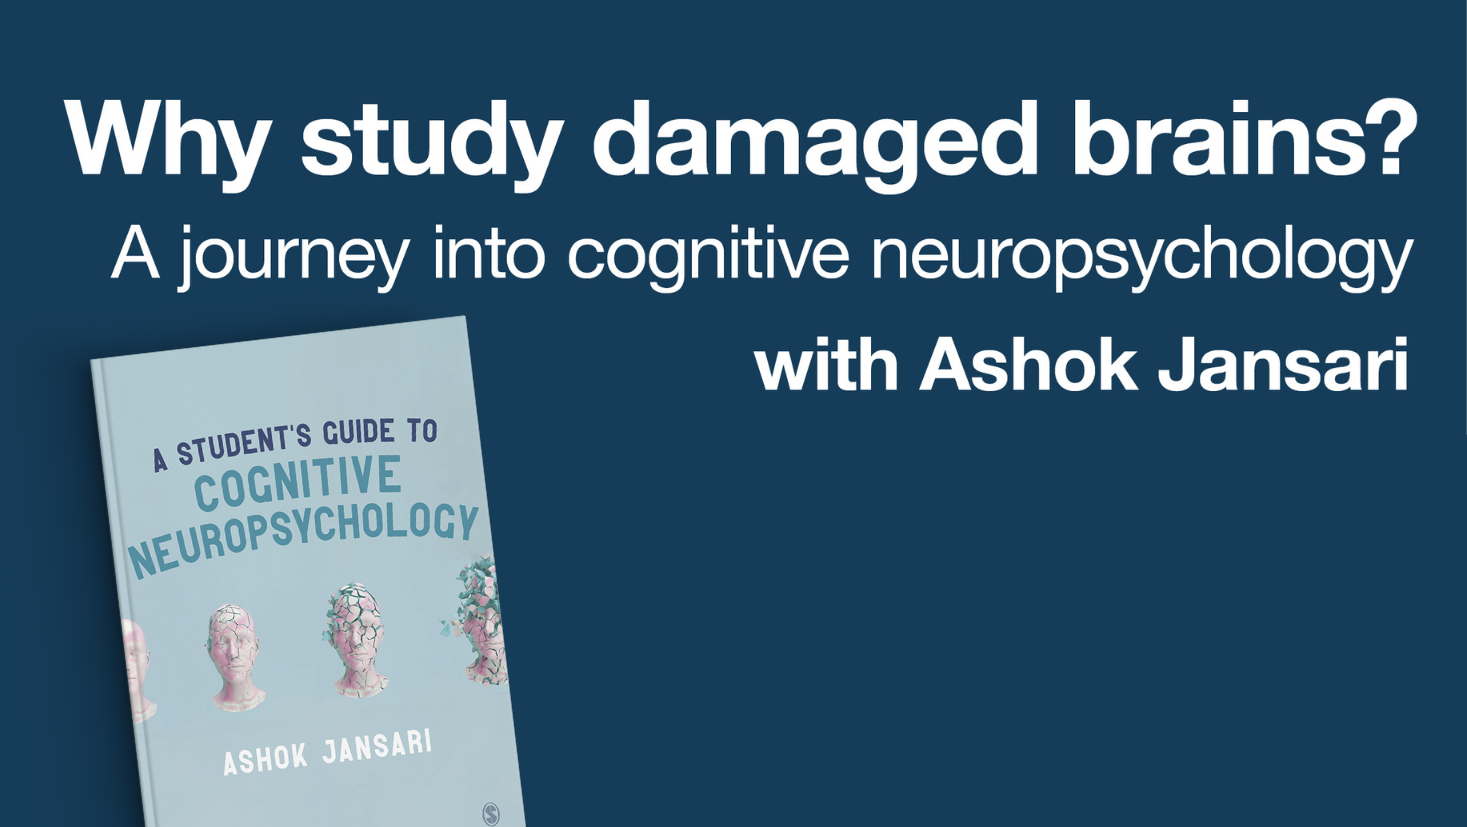 Why study damaged brains? A journey into cognitive neuropsychology